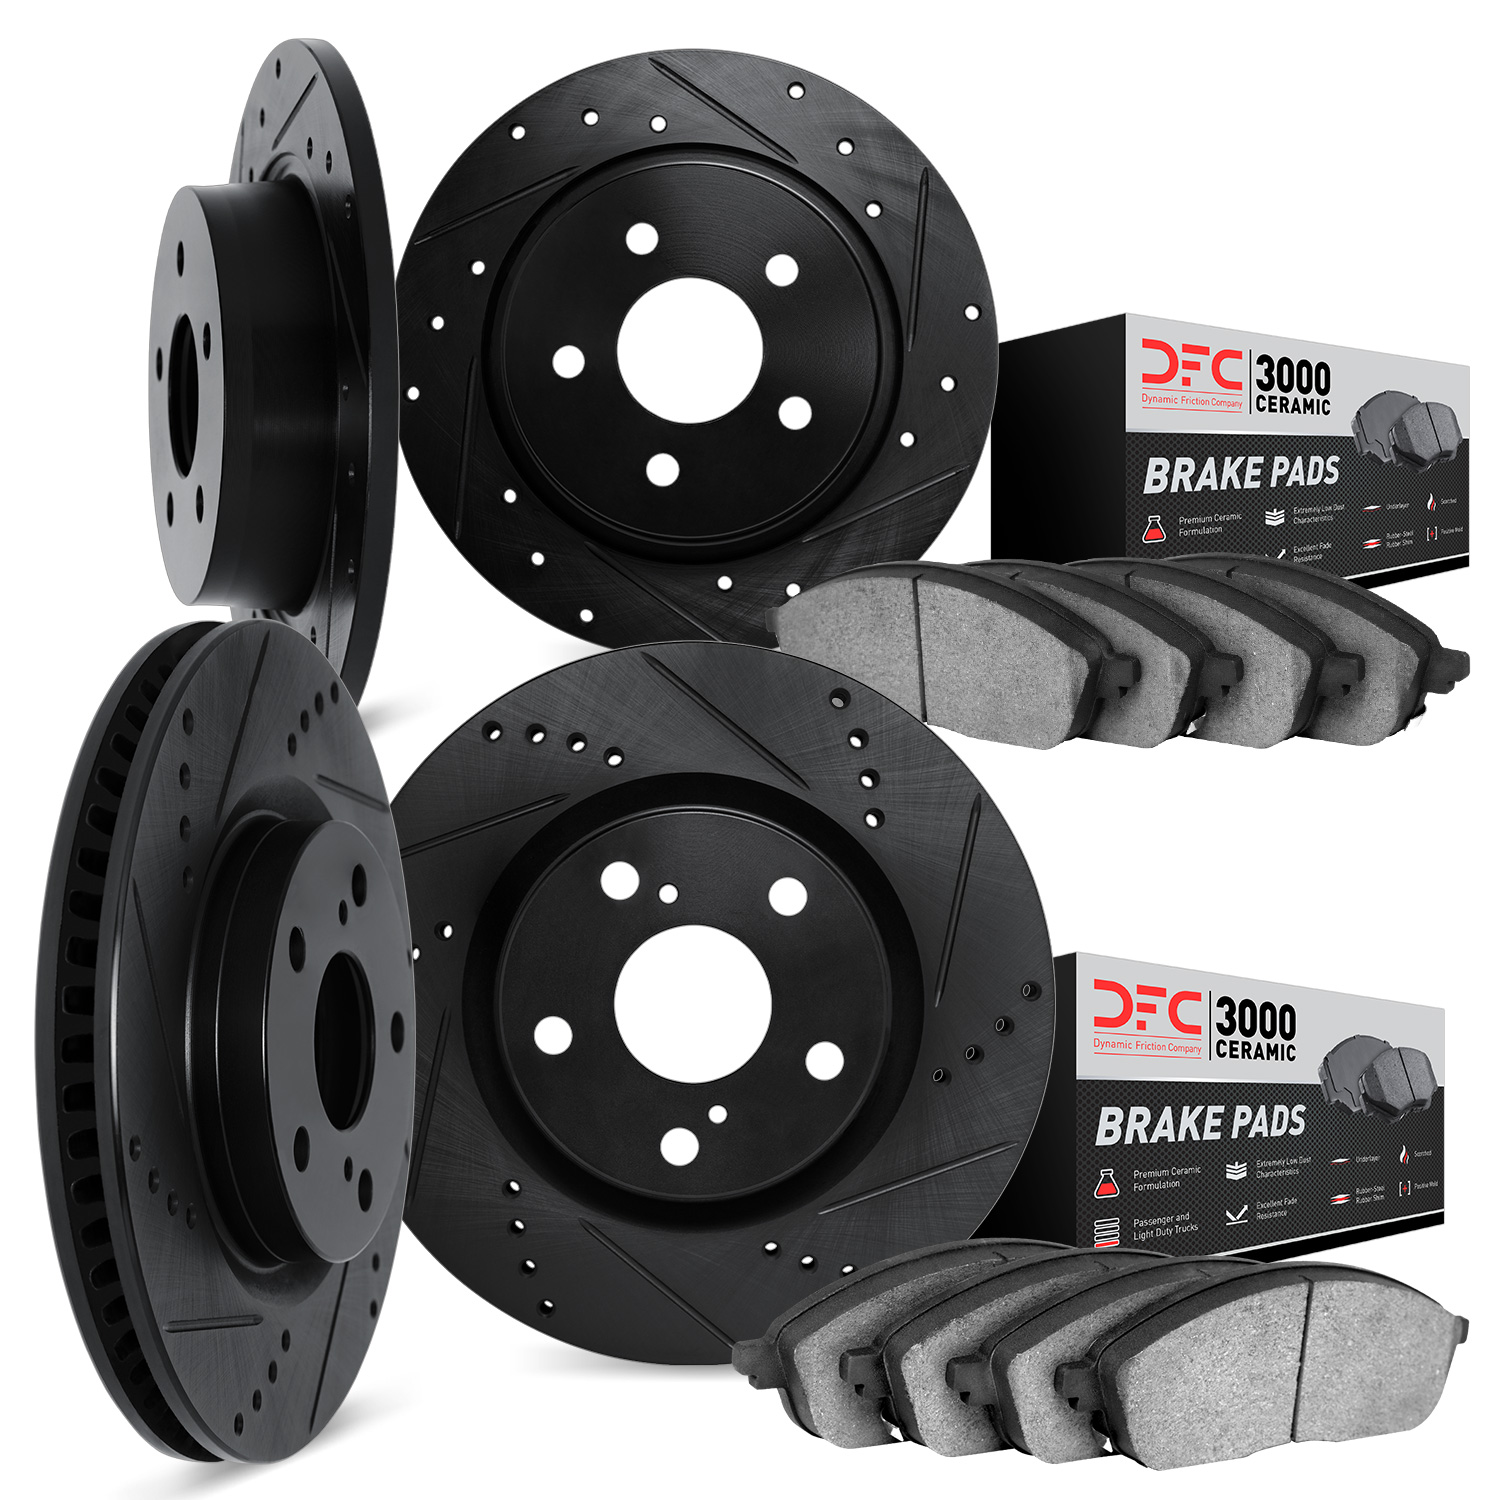 8304-59038 Drilled/Slotted Brake Rotors with 3000-Series Ceramic Brake Pads Kit [Black], 2002-2004 Acura/Honda, Position: Front